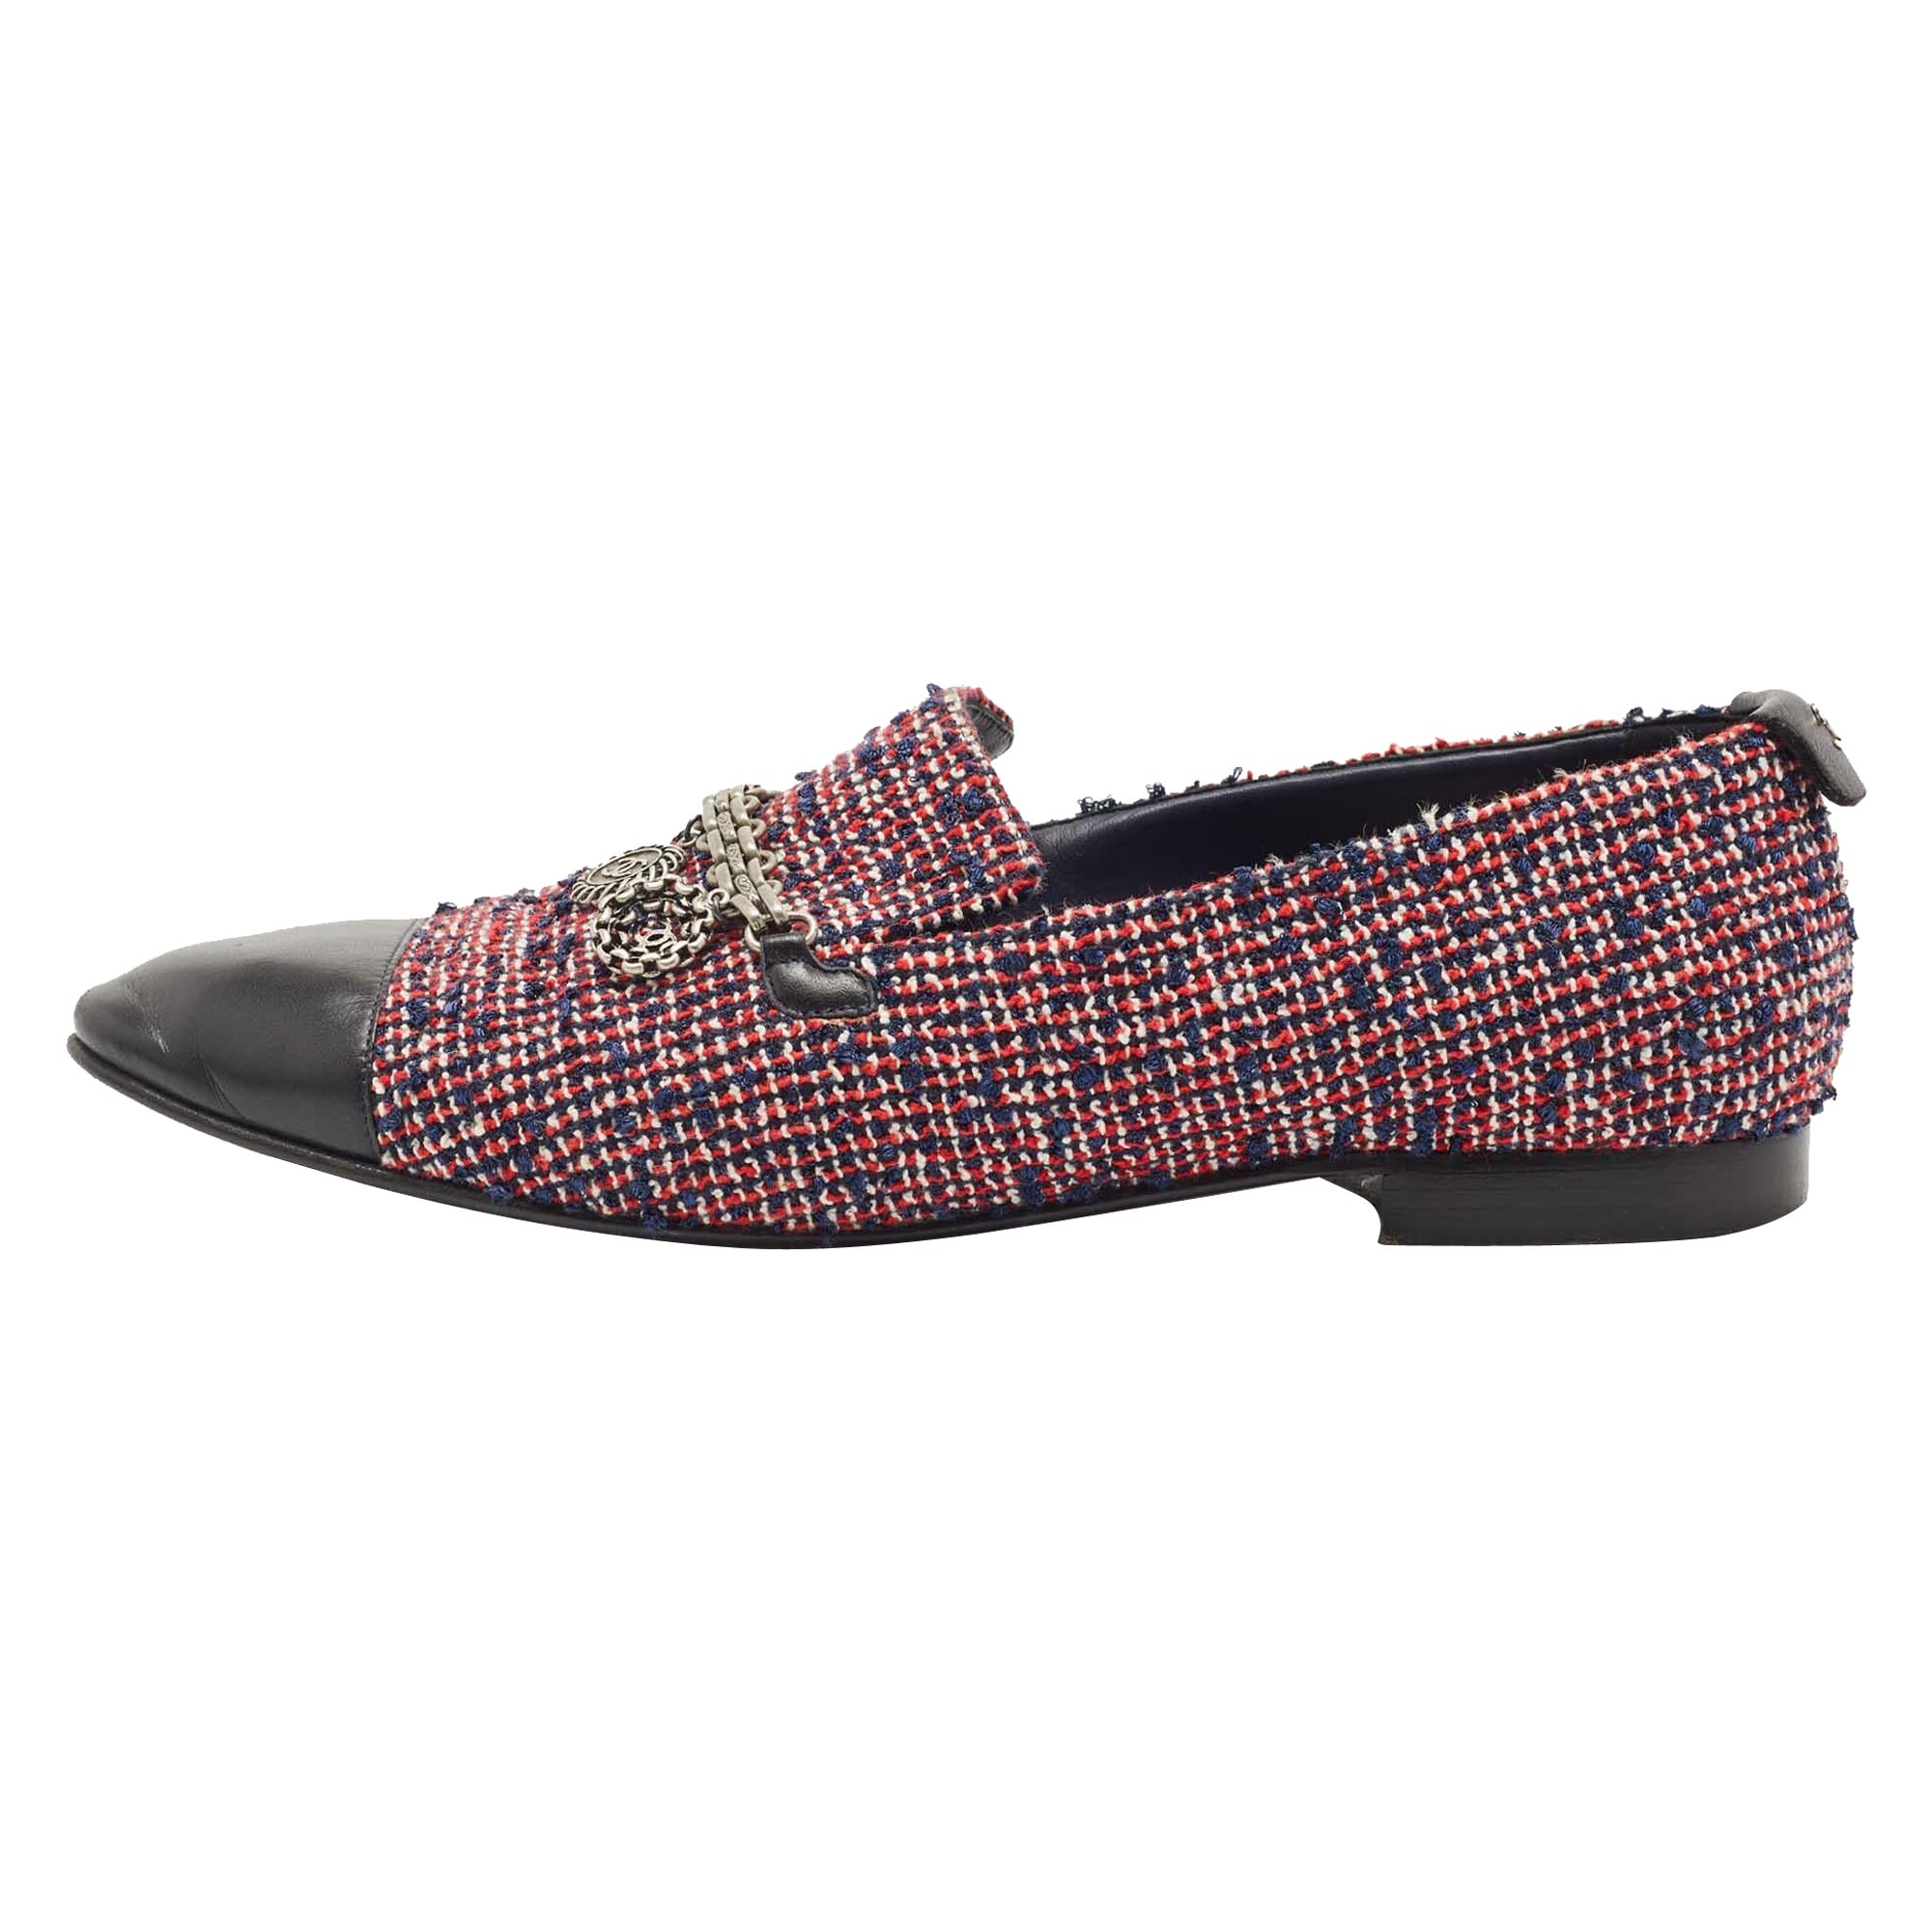 Chanel Tricolor Tweed and Leather Embellished CC Cap-Toe Smoking Slipper  Size 40 at 1stDibs